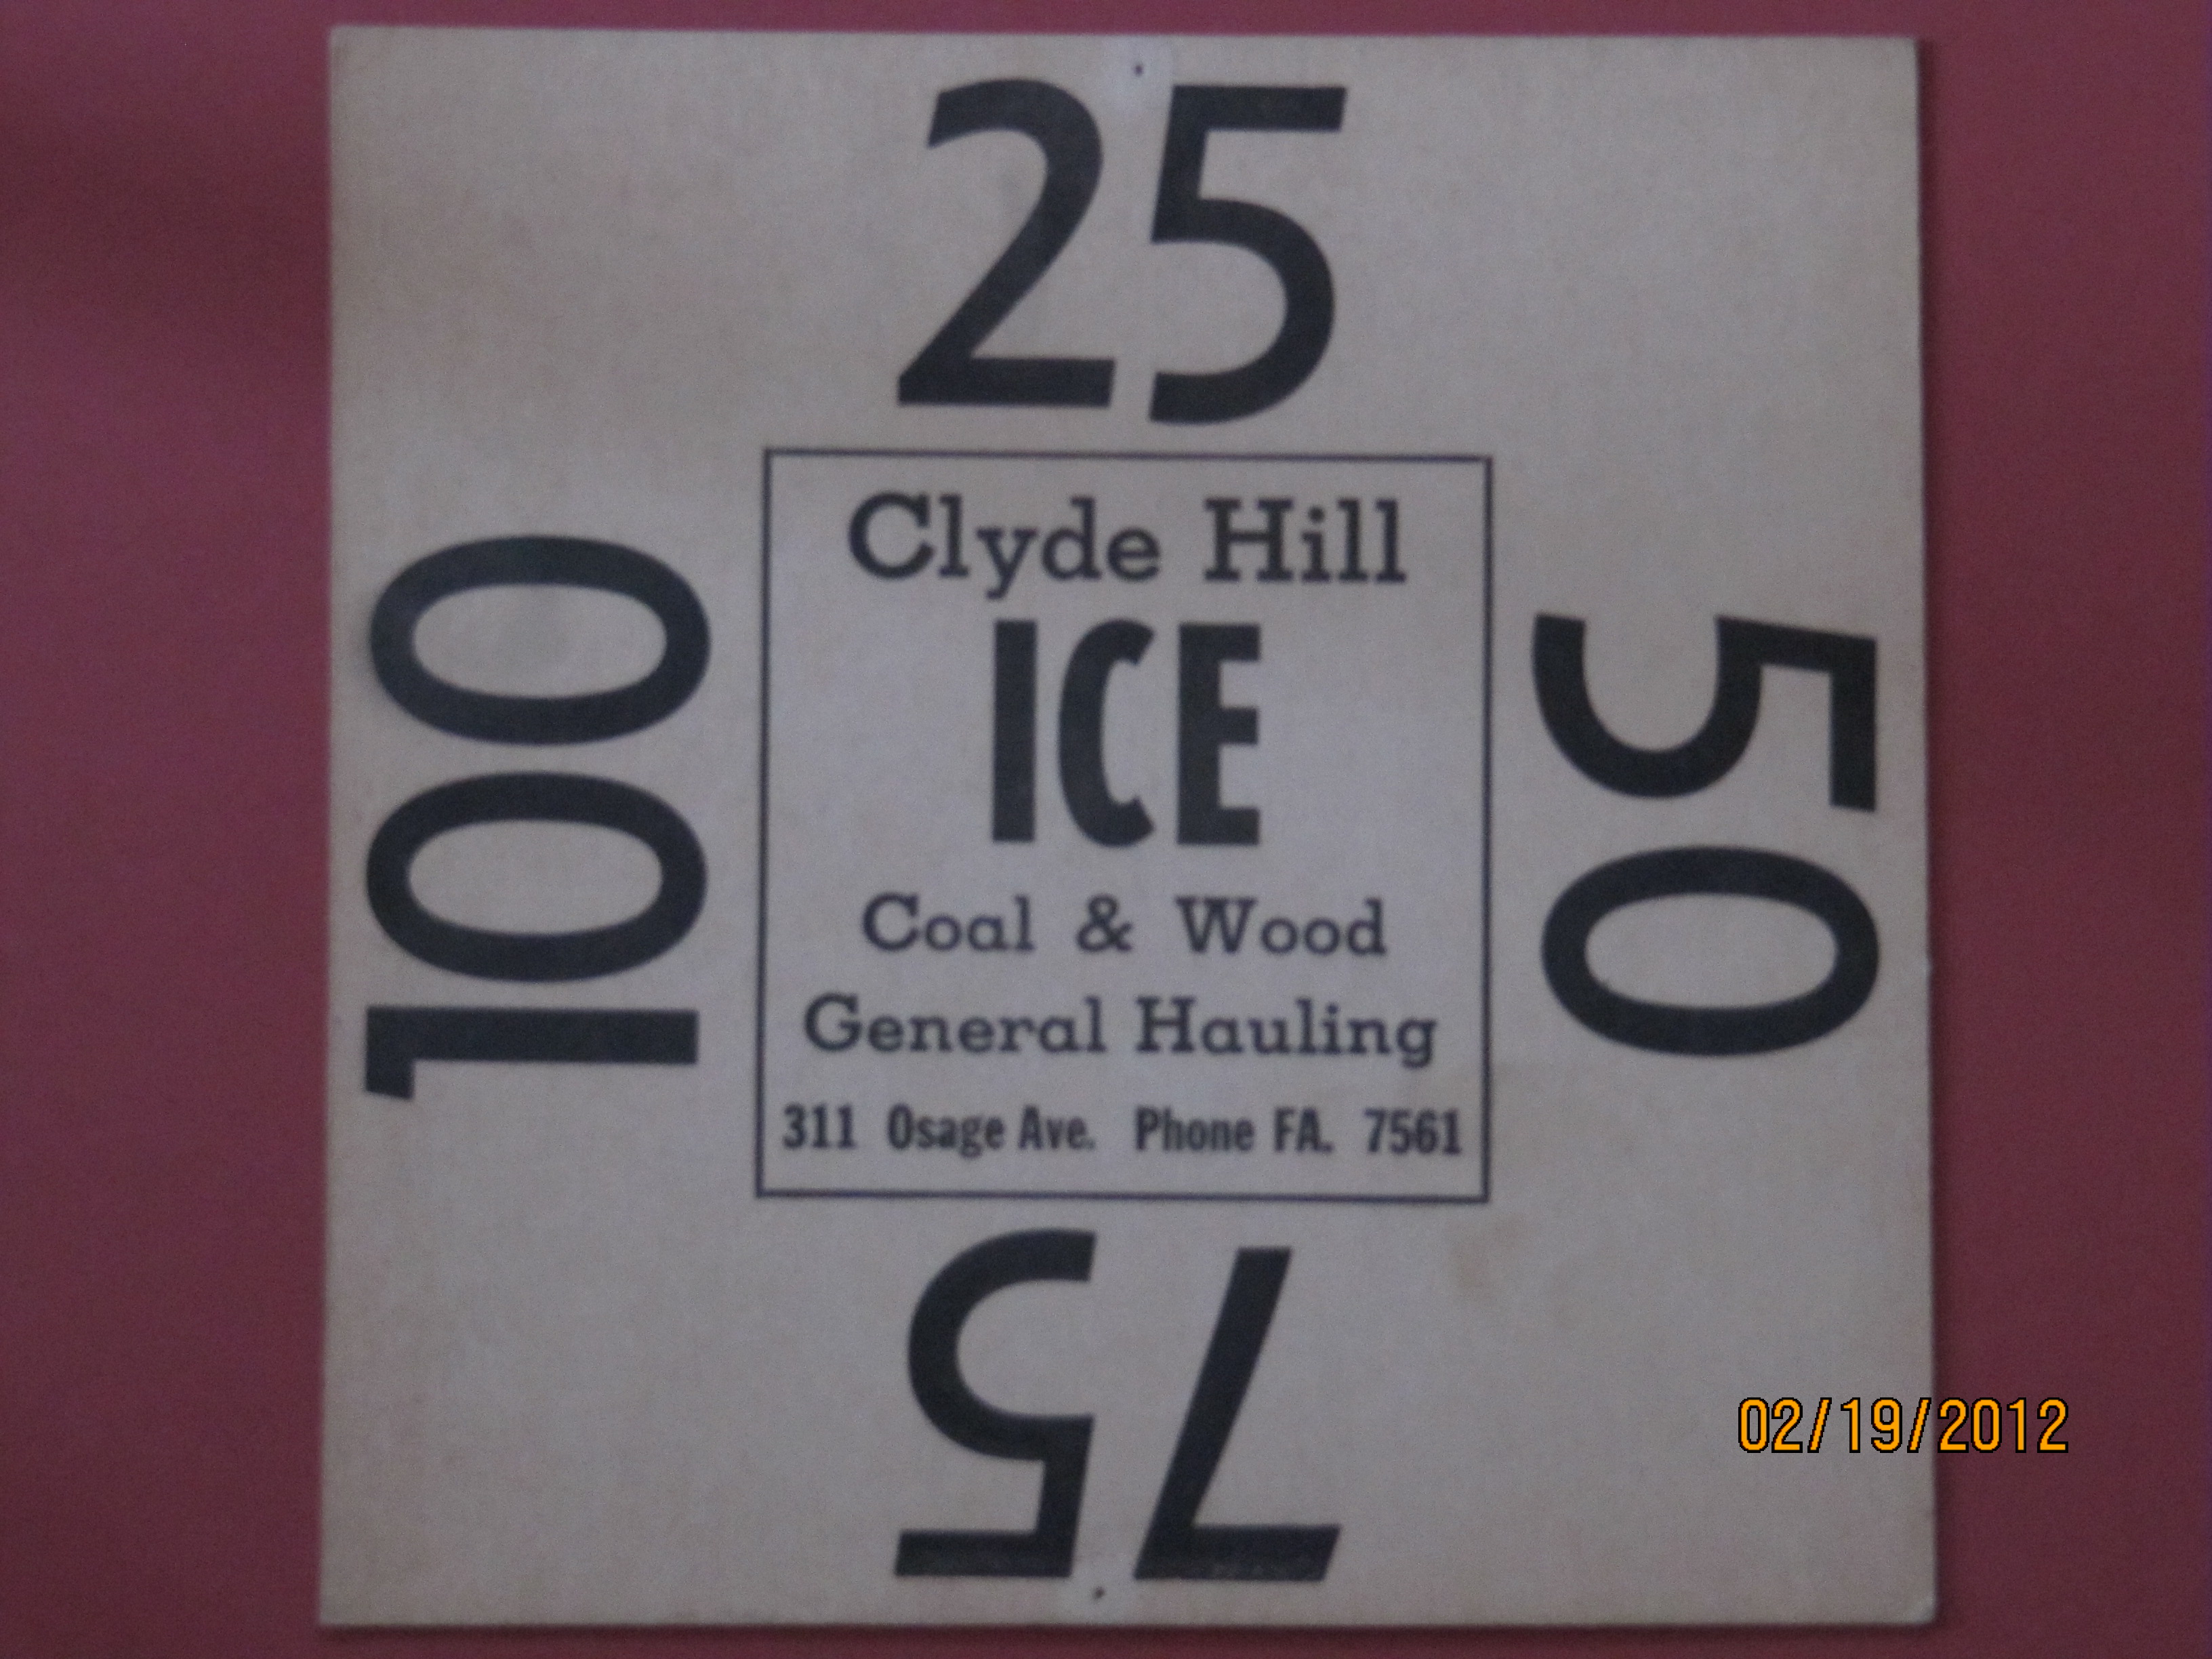 Clyde Hill Ice